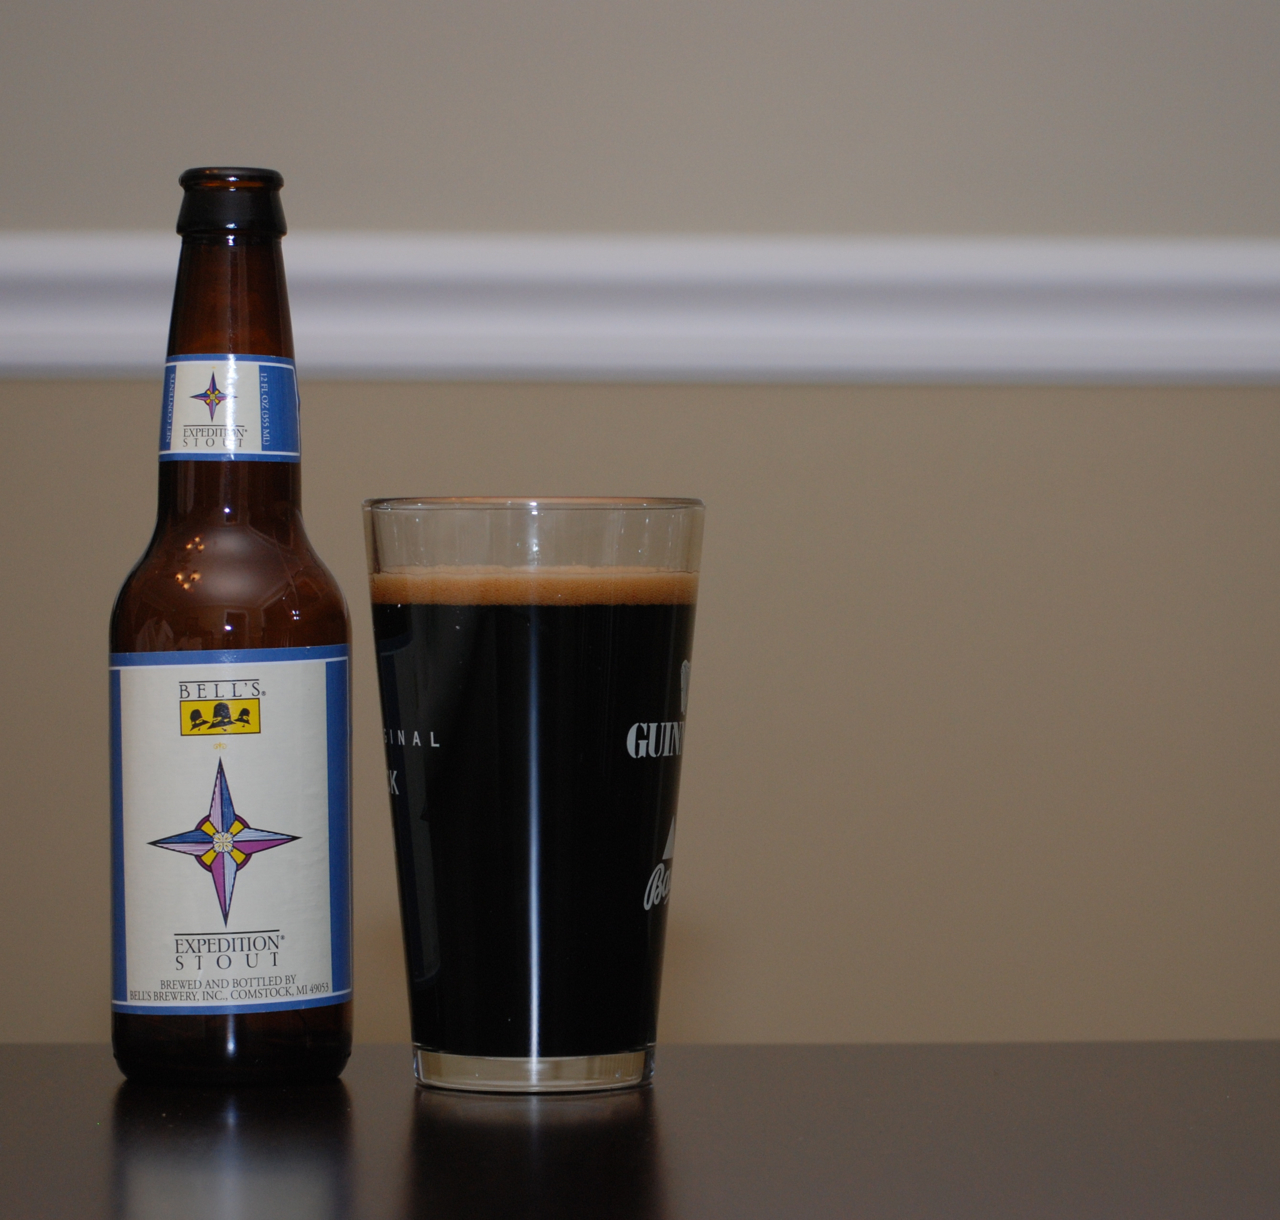 bells-expedition-stout.jpg